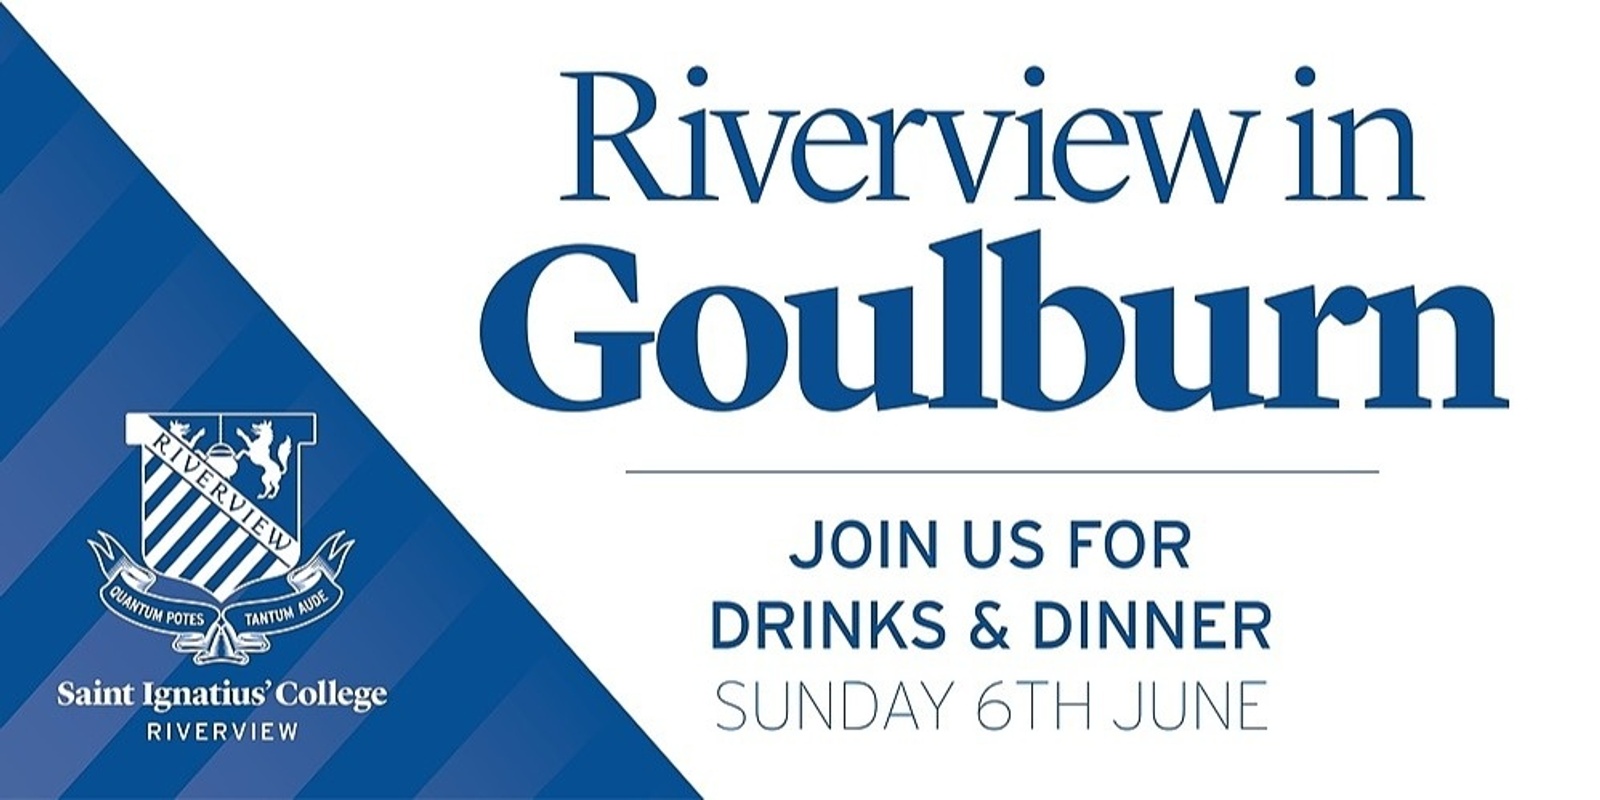 Banner image for Riverview in Goulburn